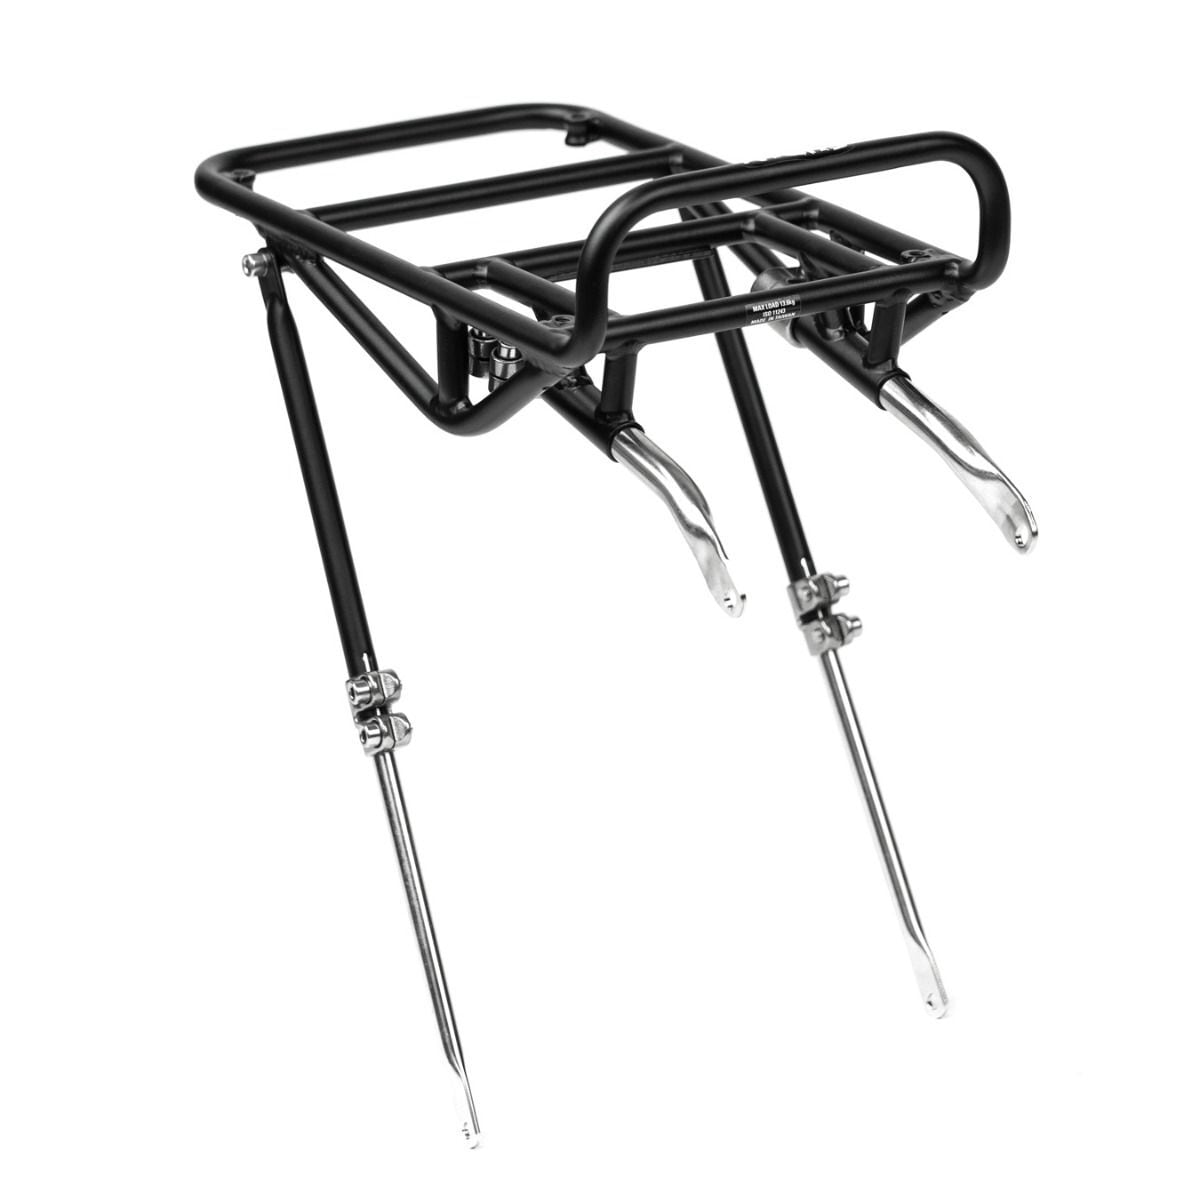 SURLY* new 8-pack rack (black) | Fergie Cycle